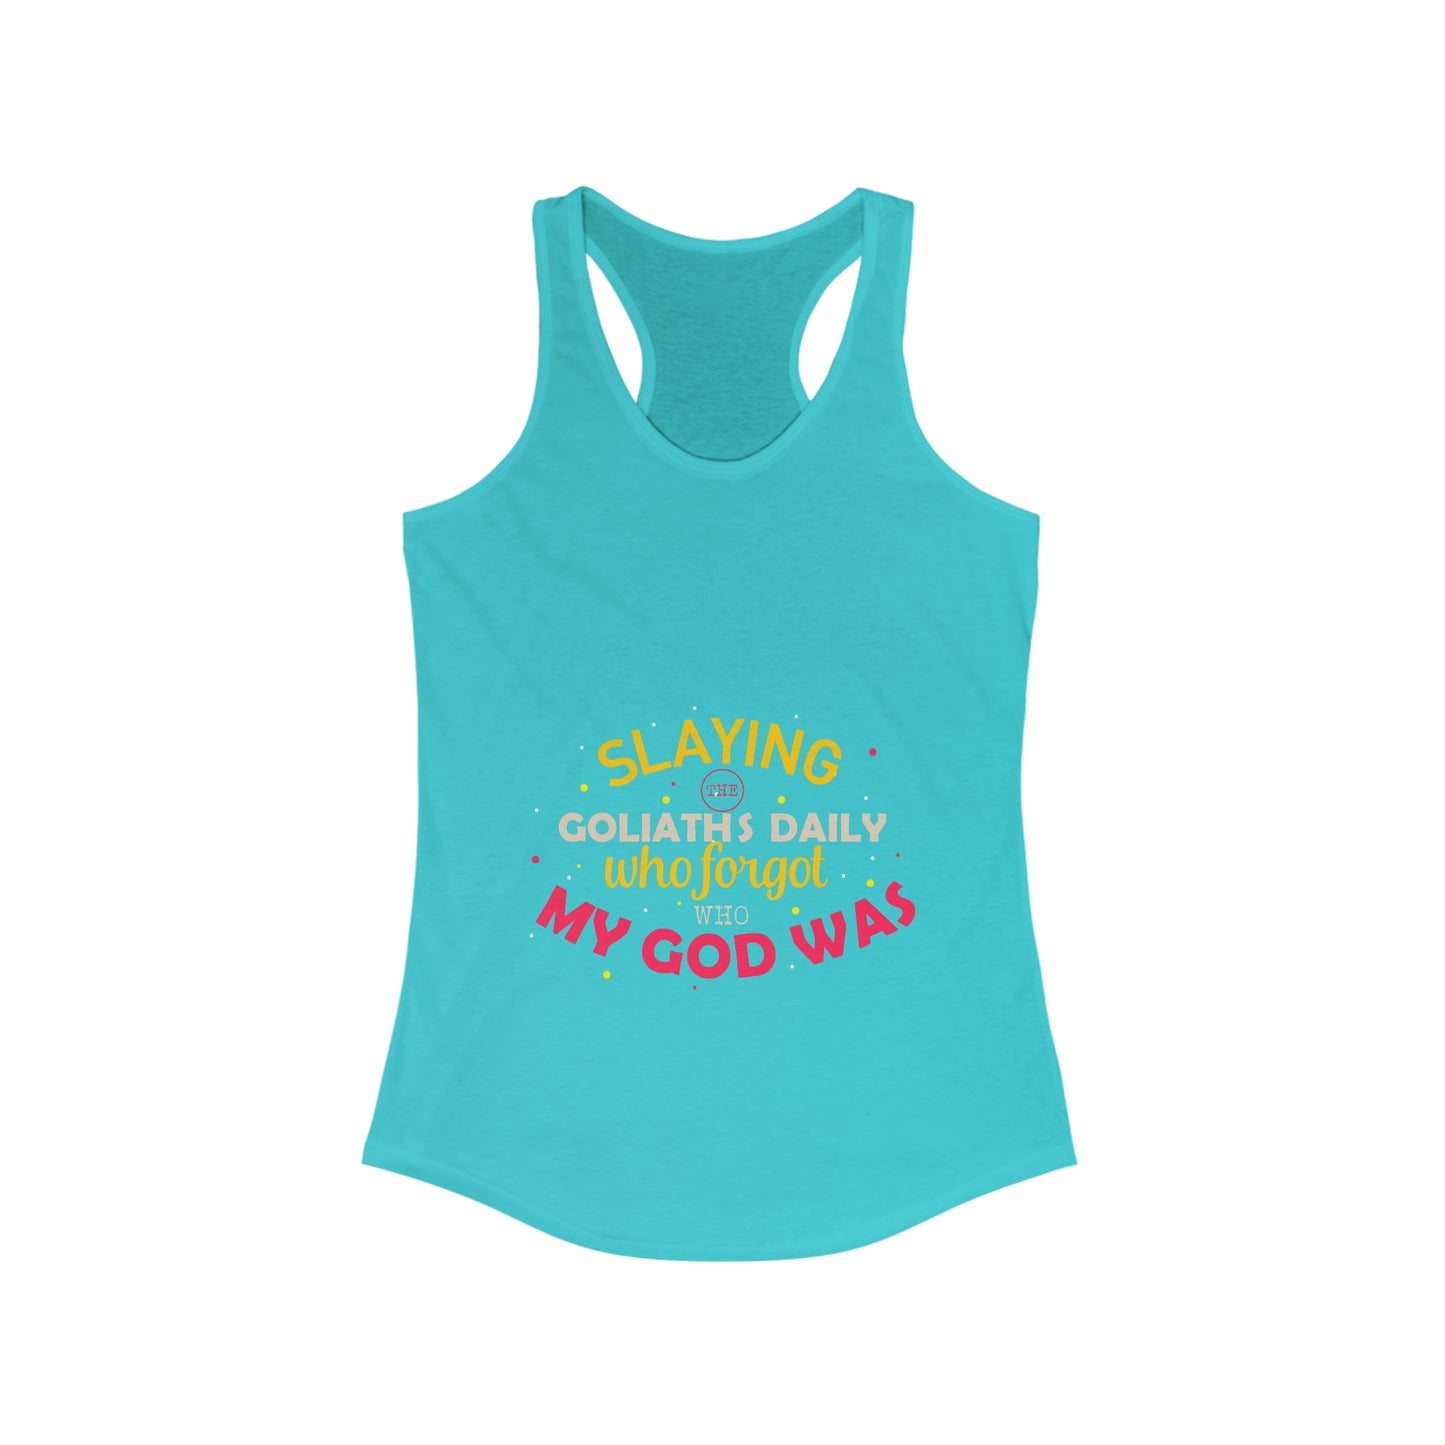 Slaying The Goliaths Daily Who Forgot Who My God Was Women’s Slim fit tank-top